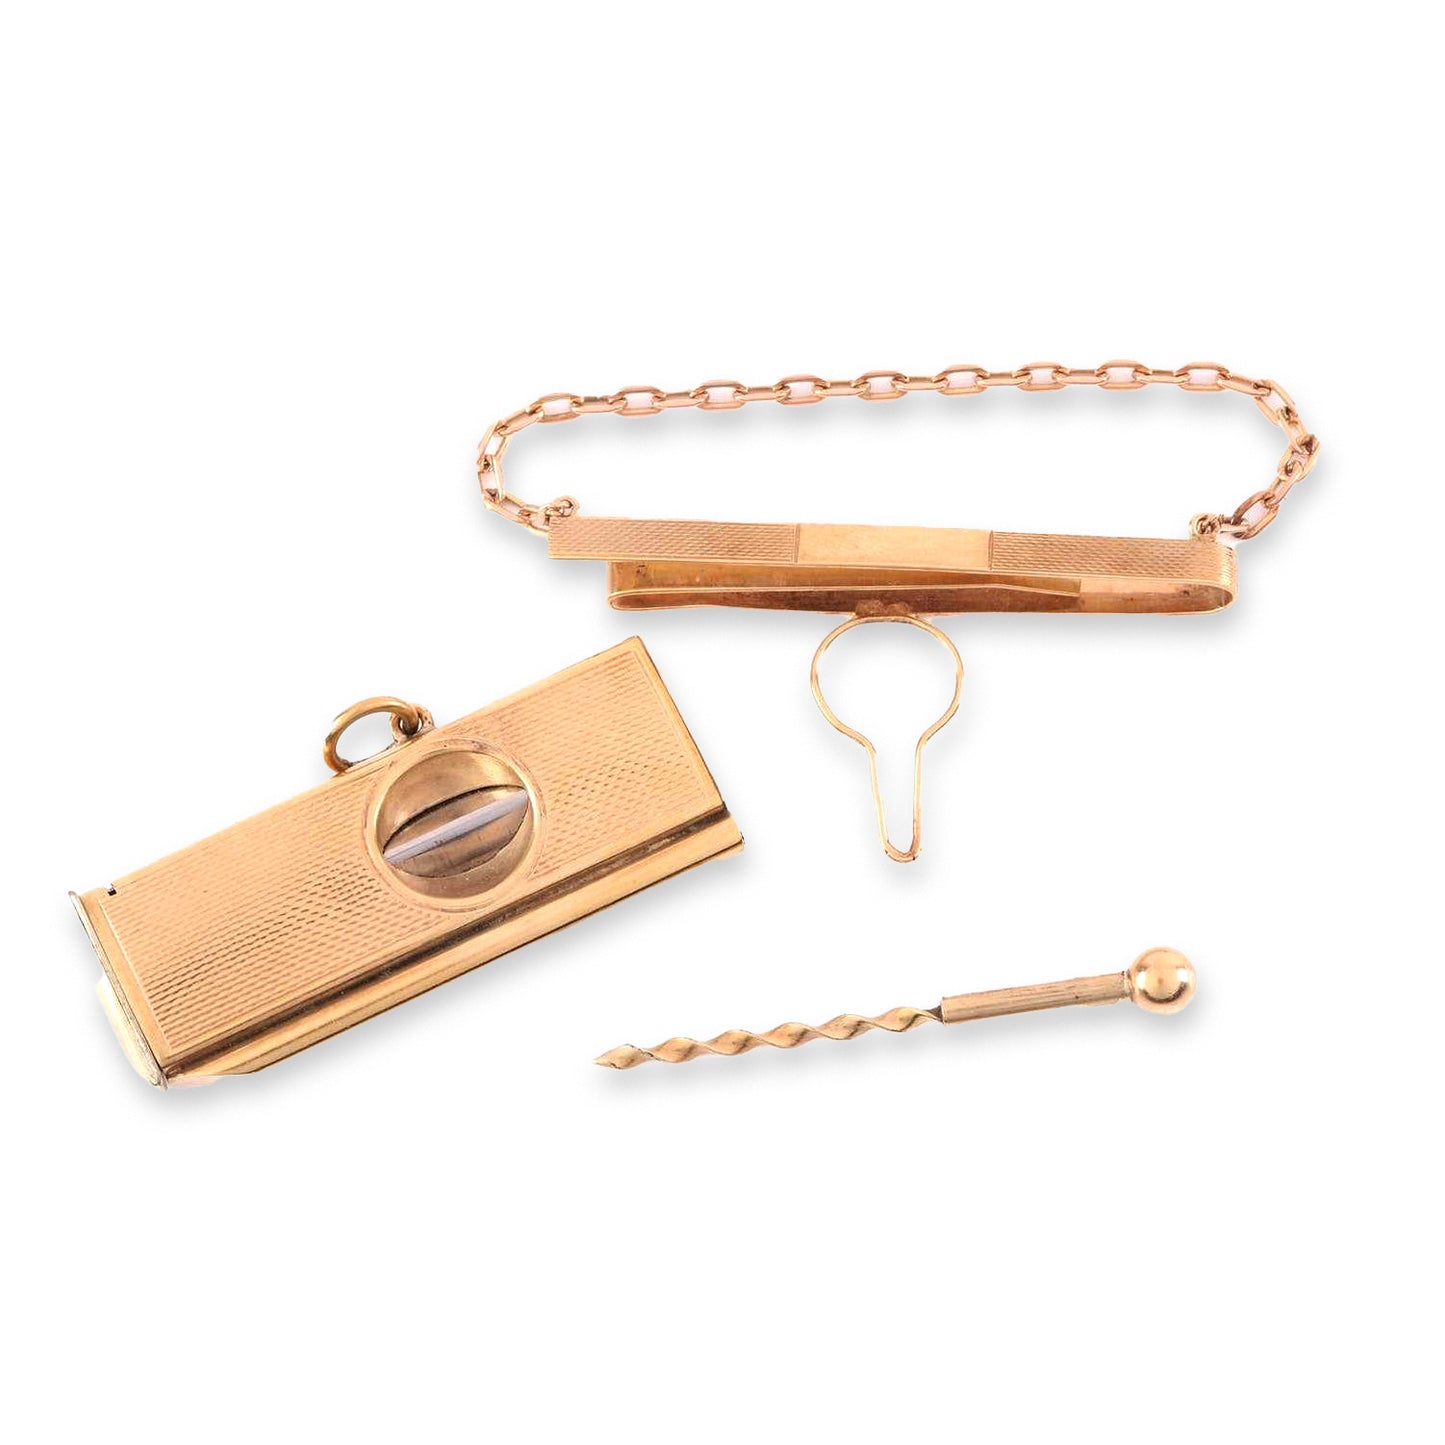 English Cigar Wedge Cutter and Tie Clip Set